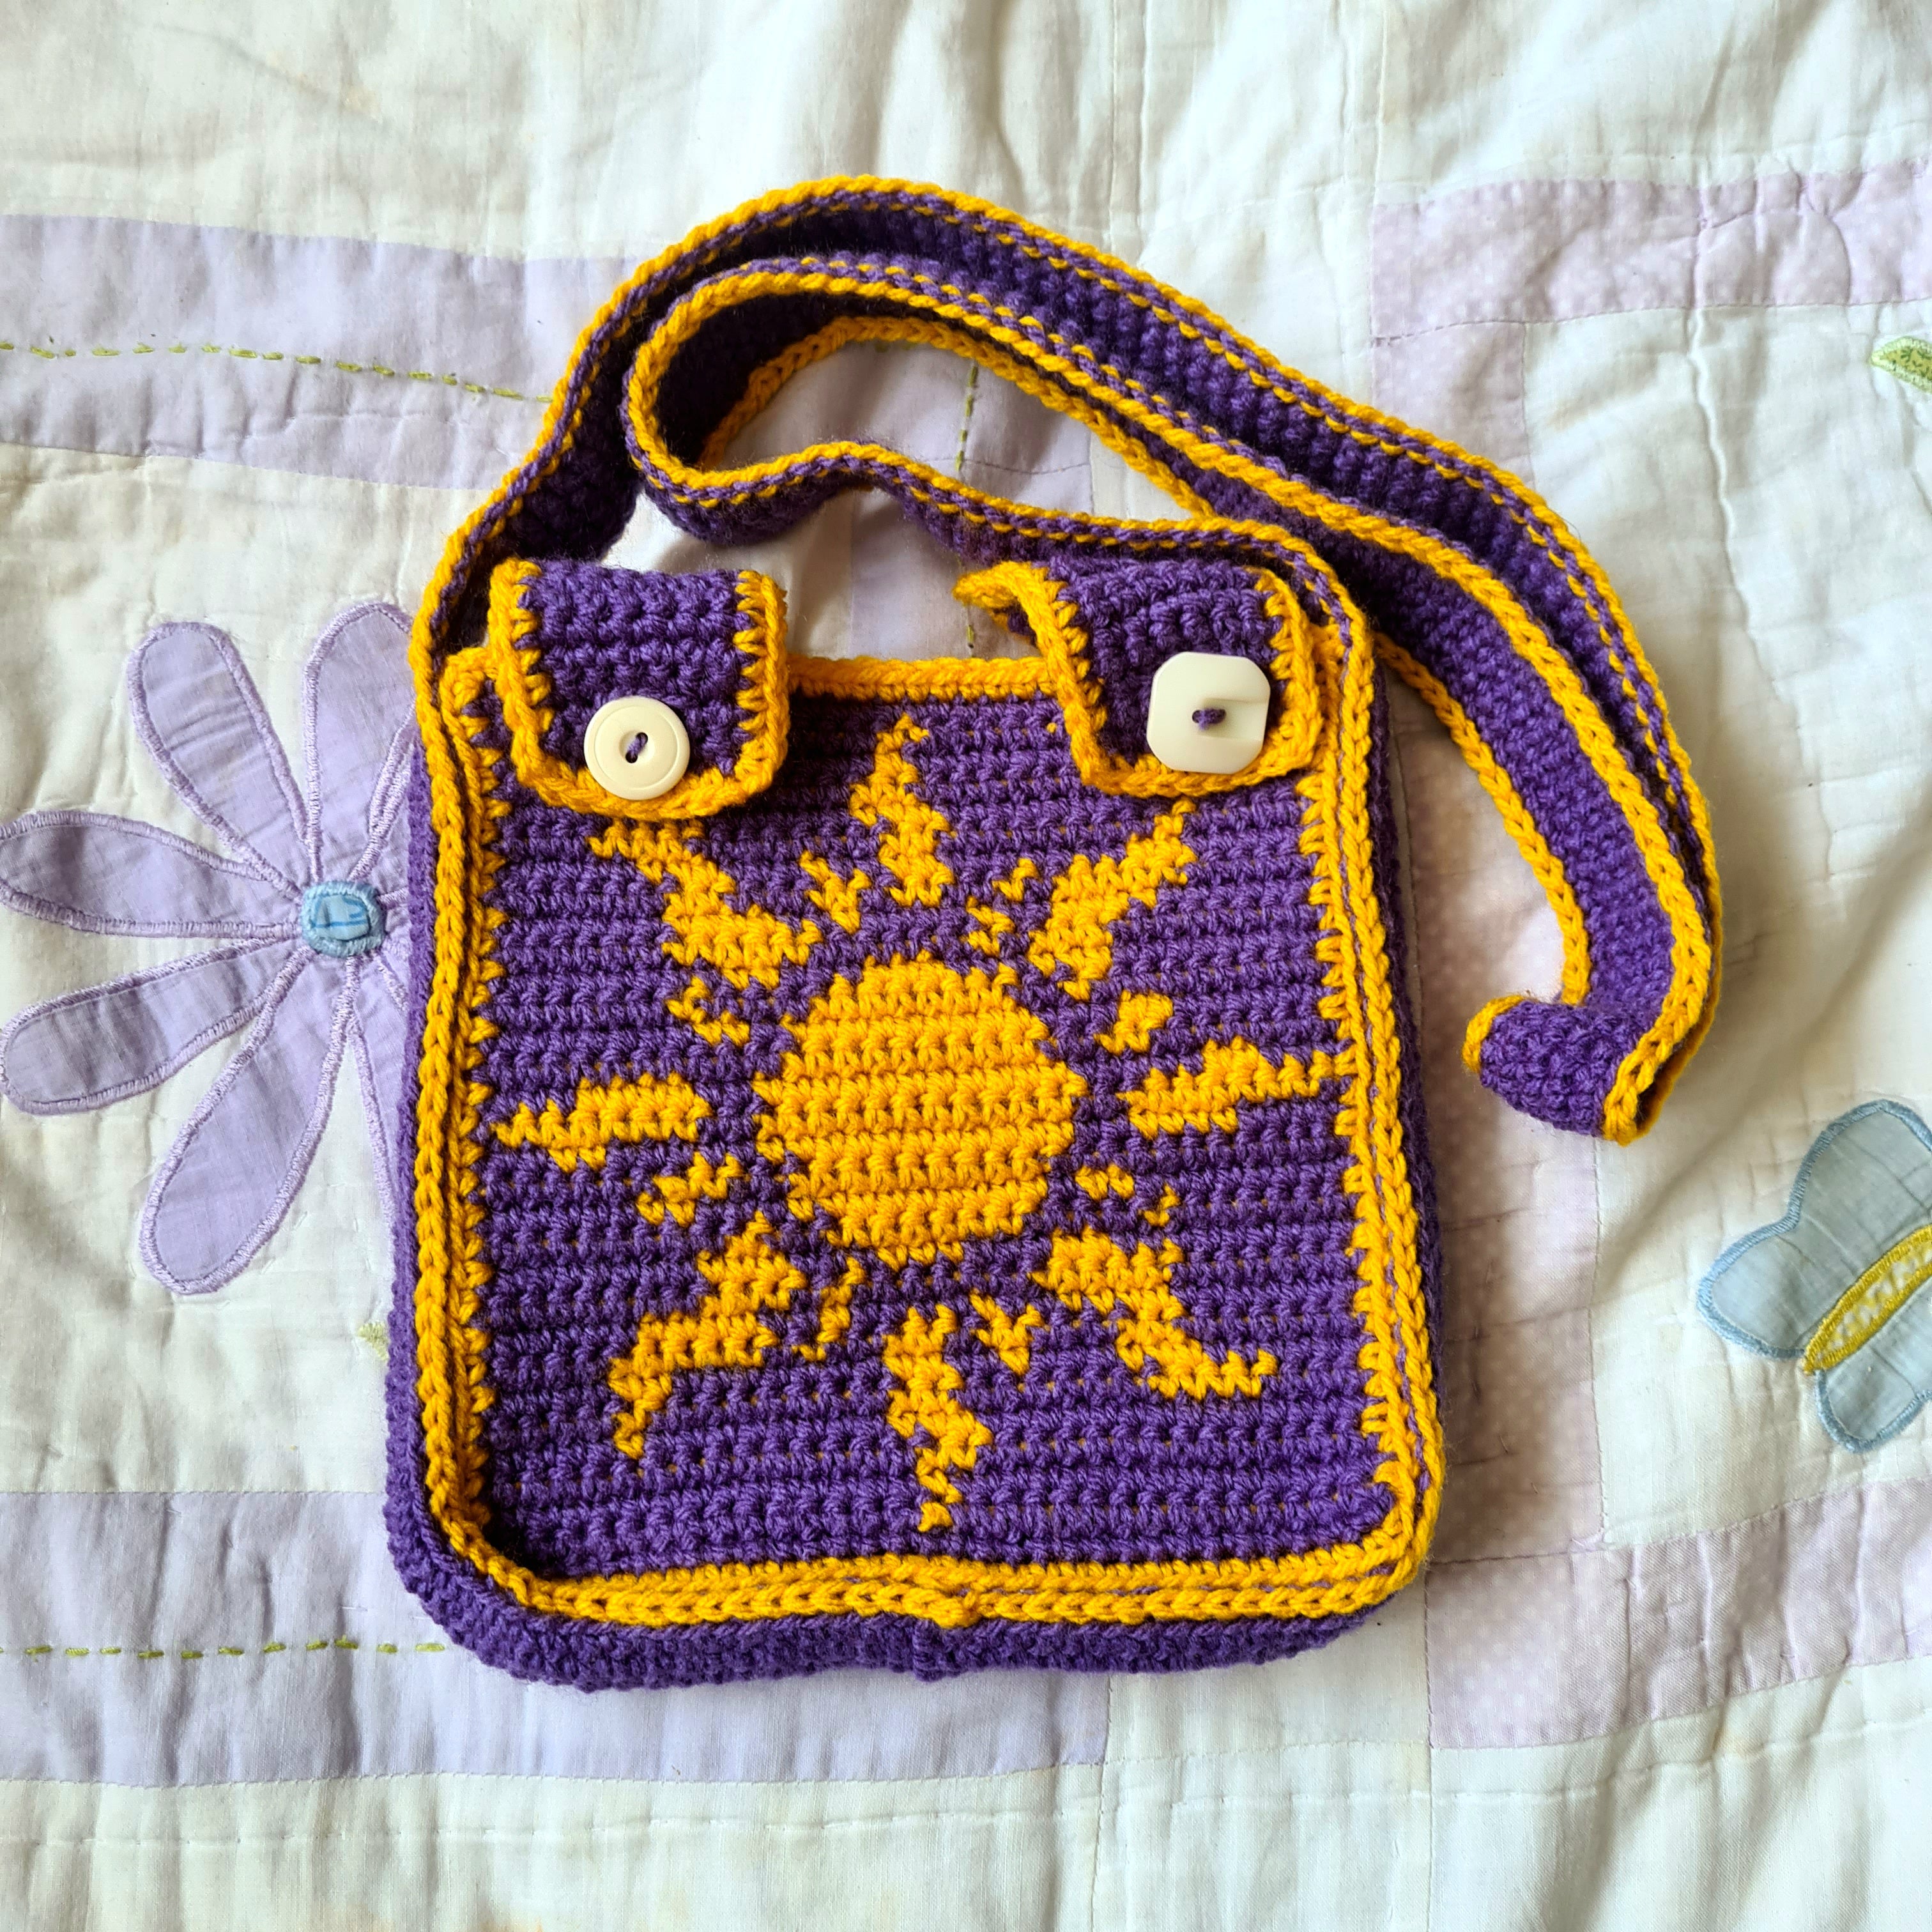 How to make a kitten crochet bag from a T-shirt – Crafty Messy Mom